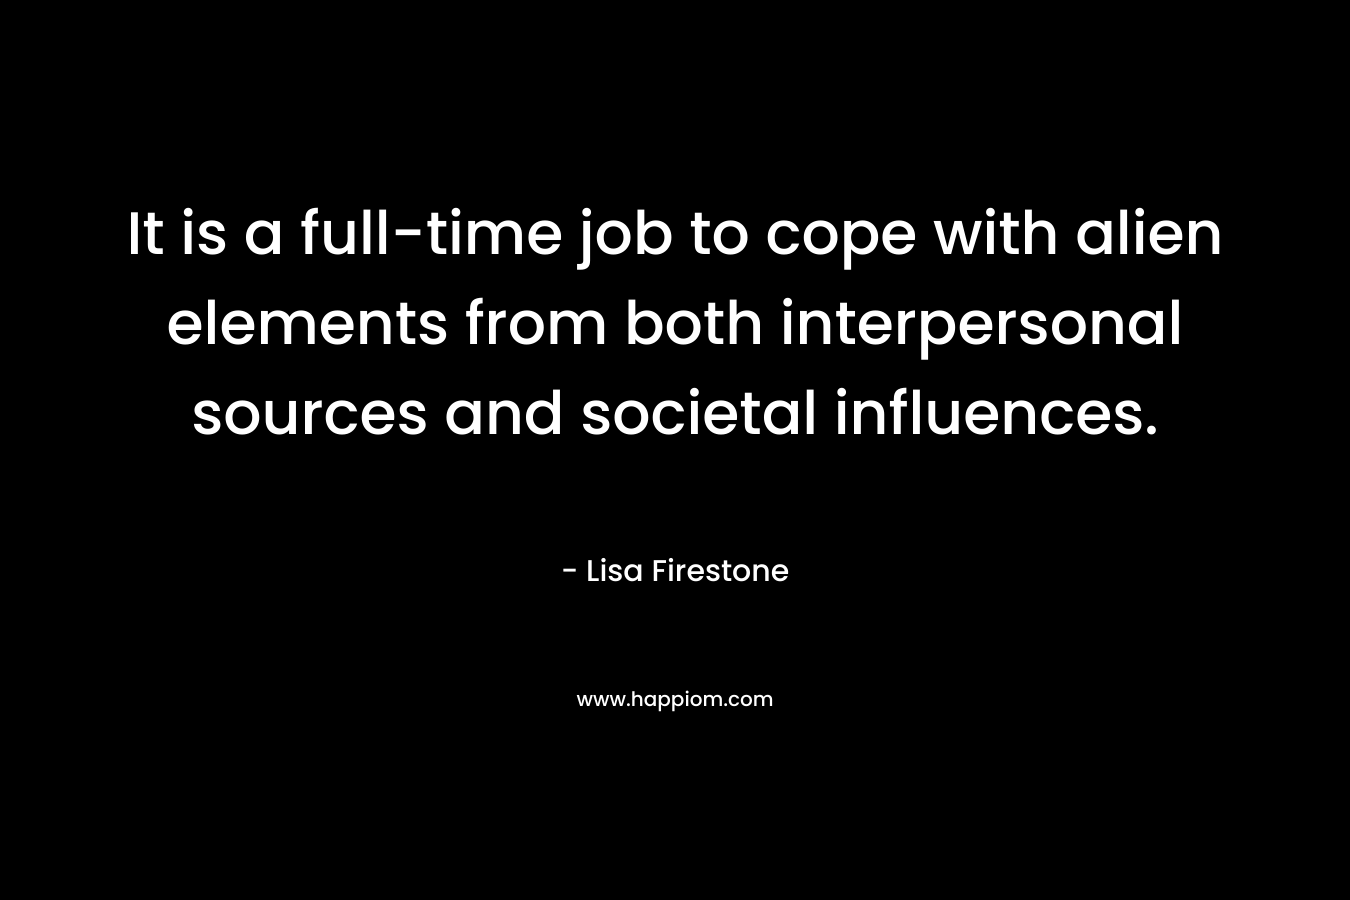 It is a full-time job to cope with alien elements from both interpersonal sources and societal influences. – Lisa Firestone